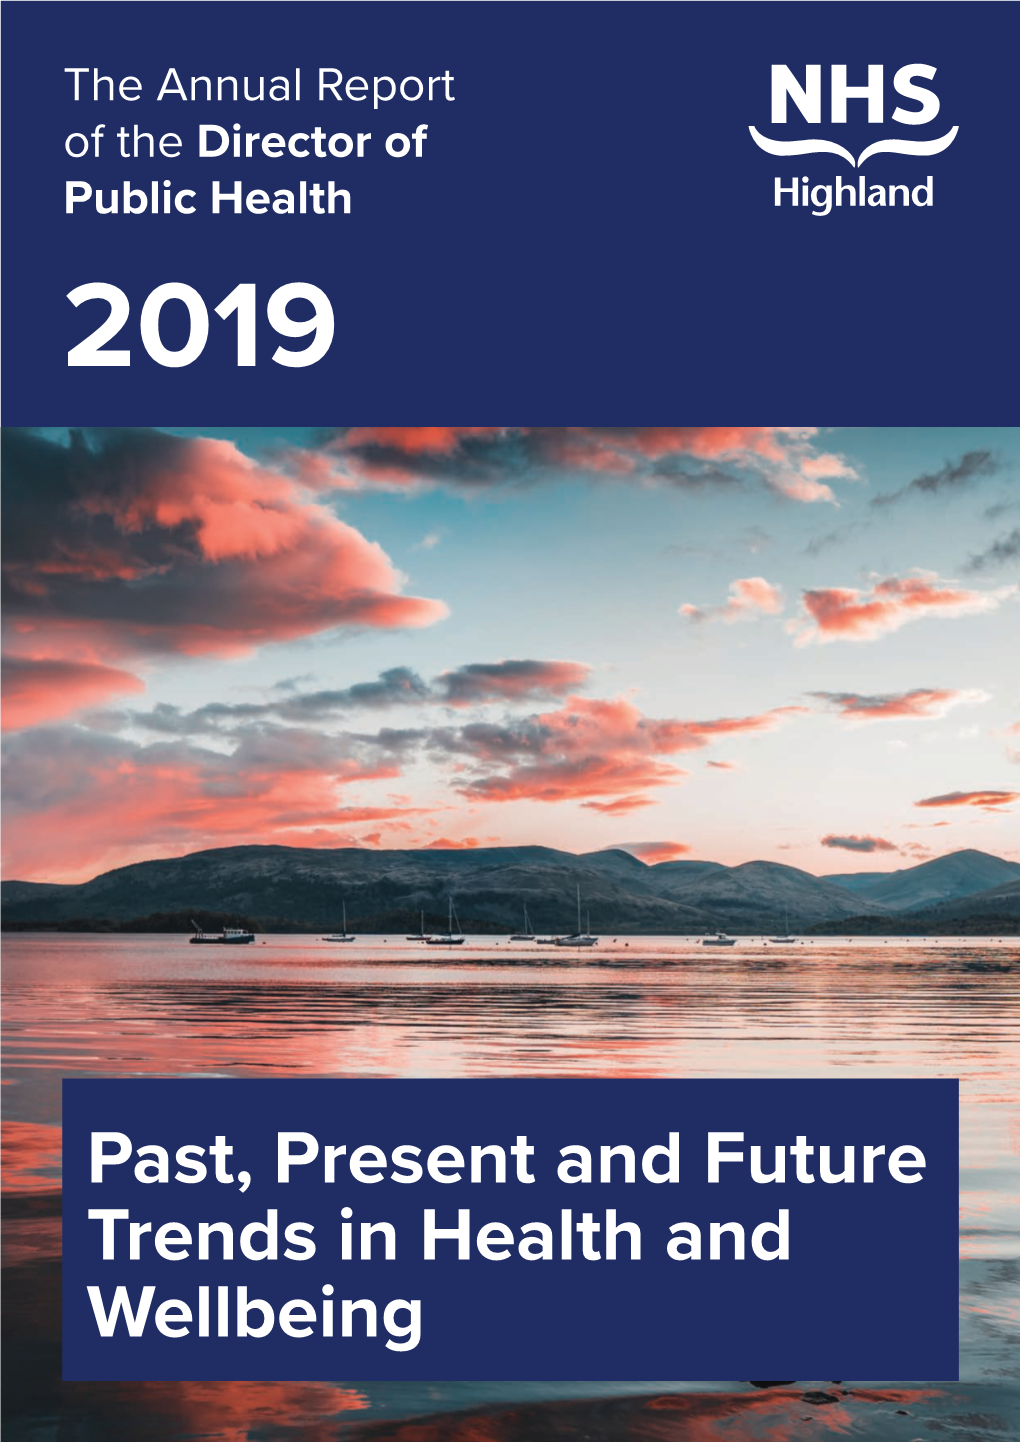 Past, Present and Future Trends in Health and Wellbeing 2 Director of Public Health Annual Report 2019 Acknowledgements and List of Contributors